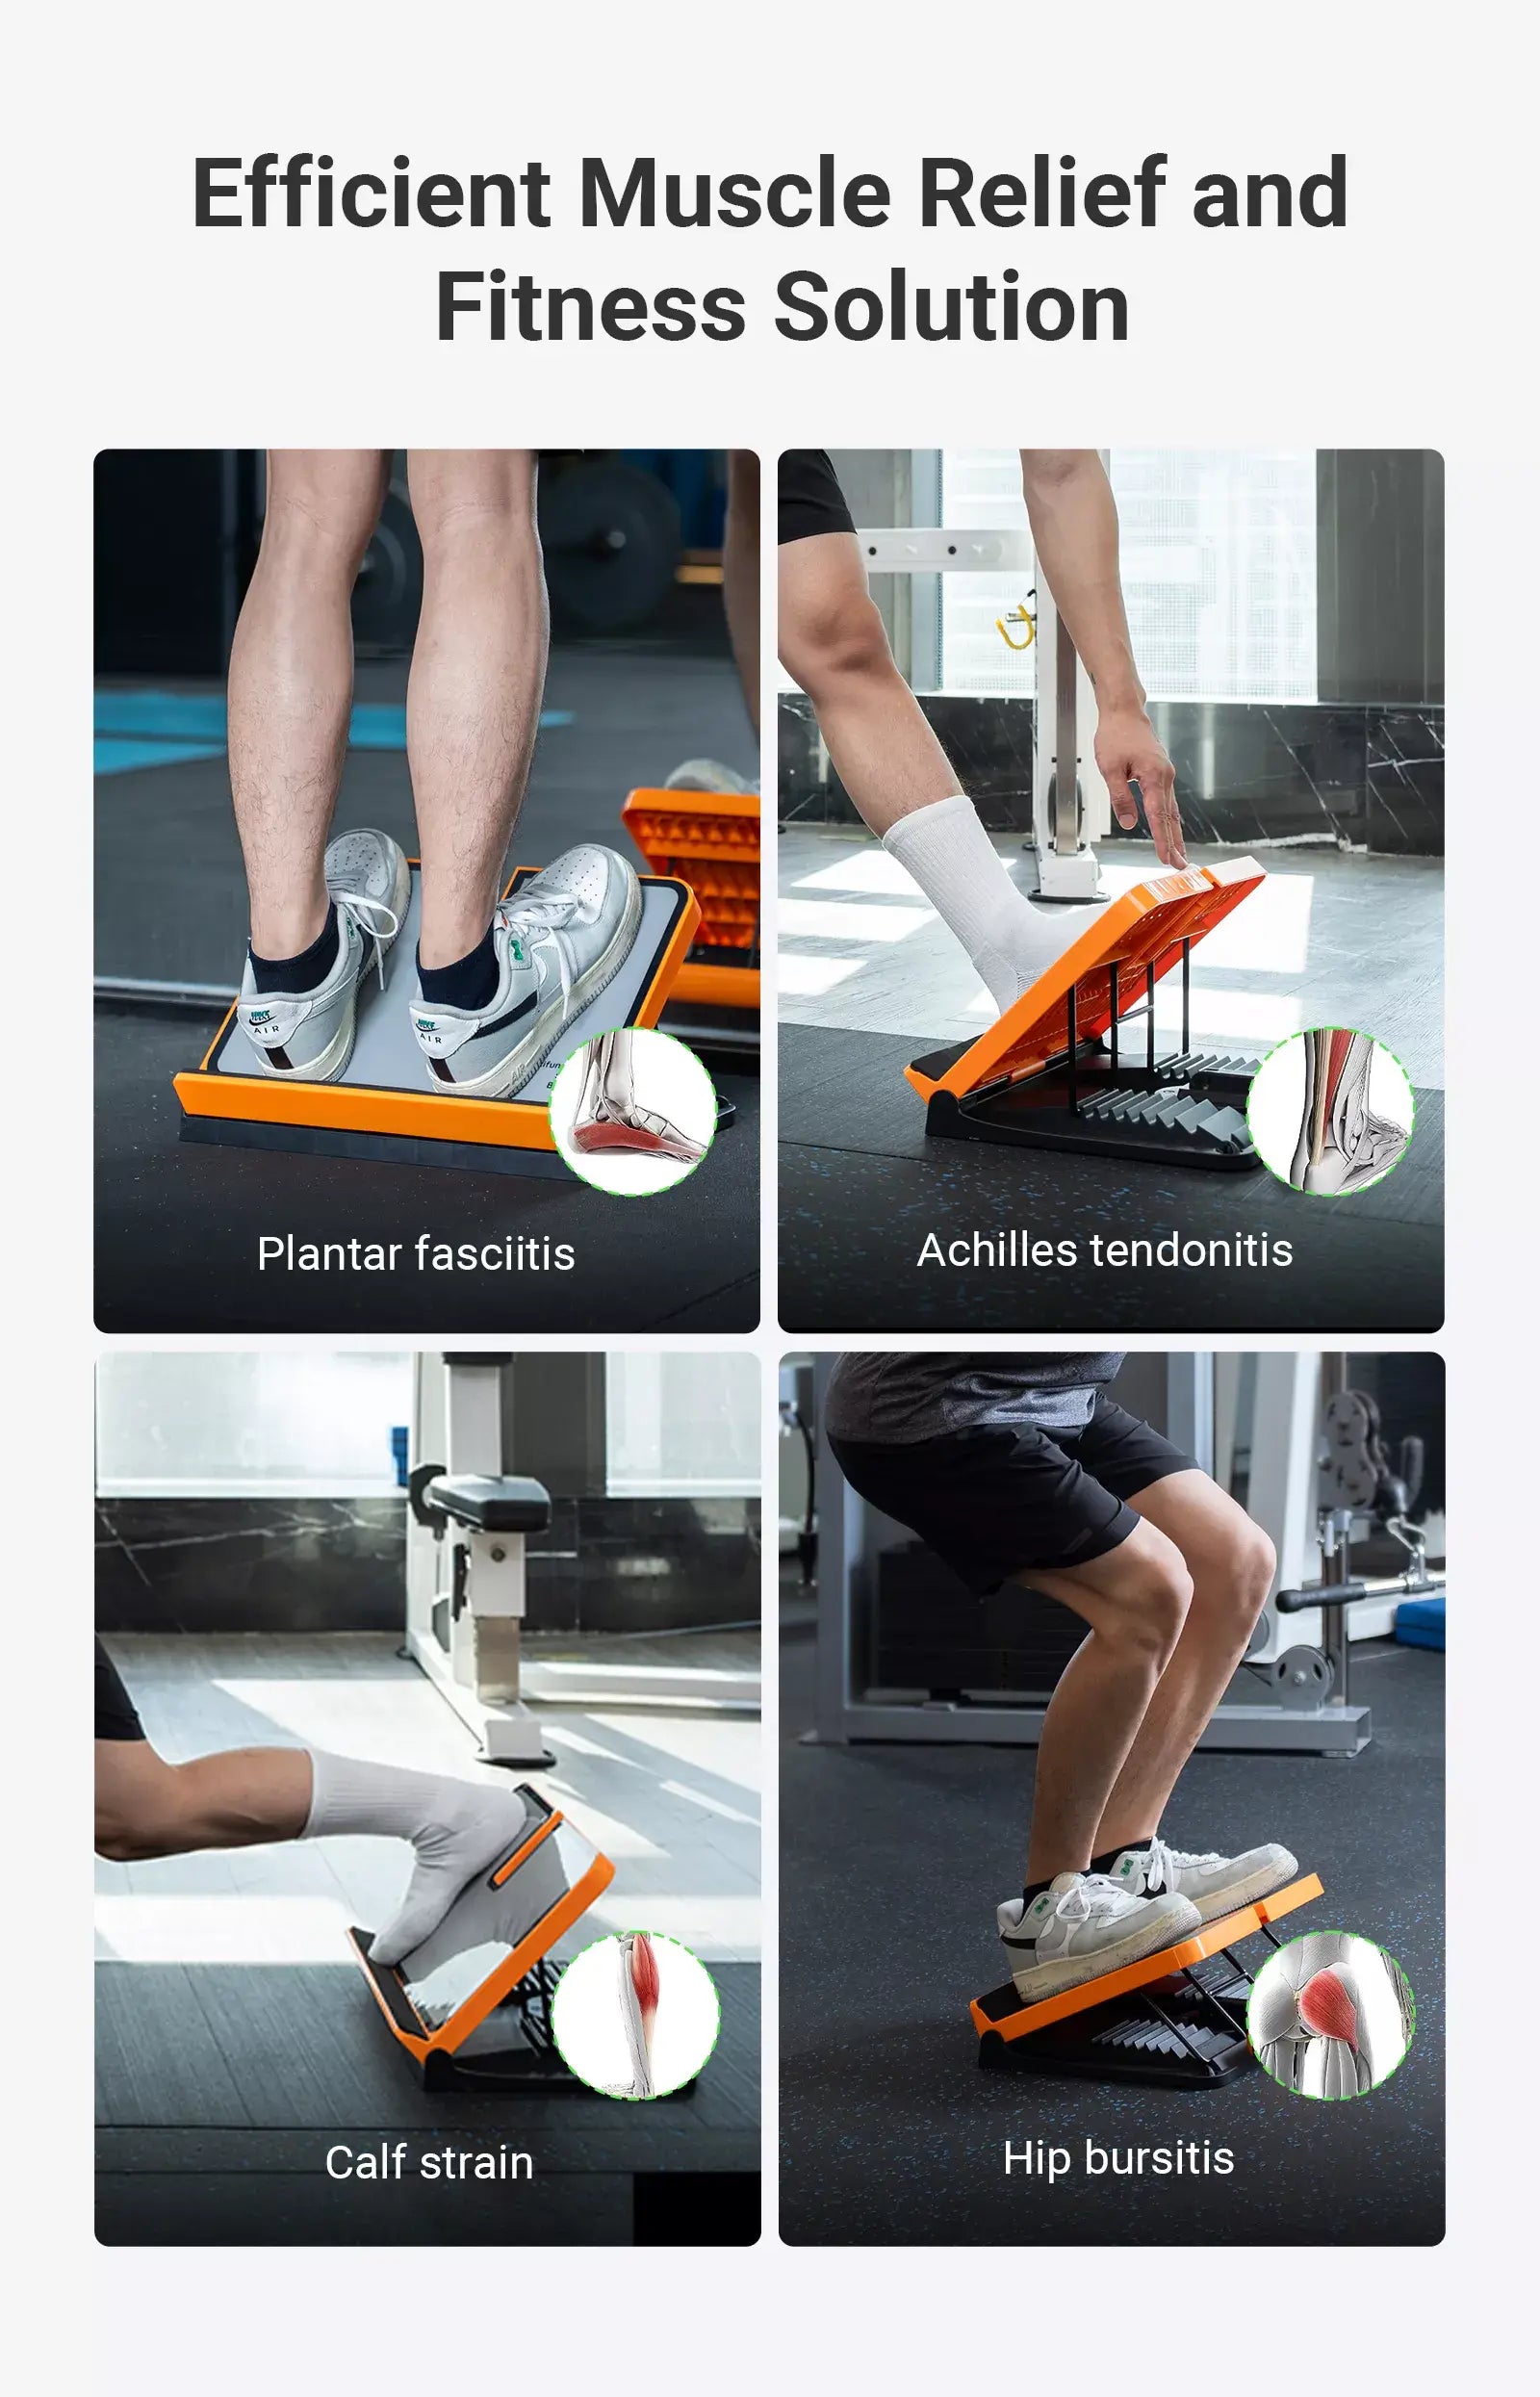 3-in-1 Multifunctional Slant Board for Calf Stretching and Physical Therapy